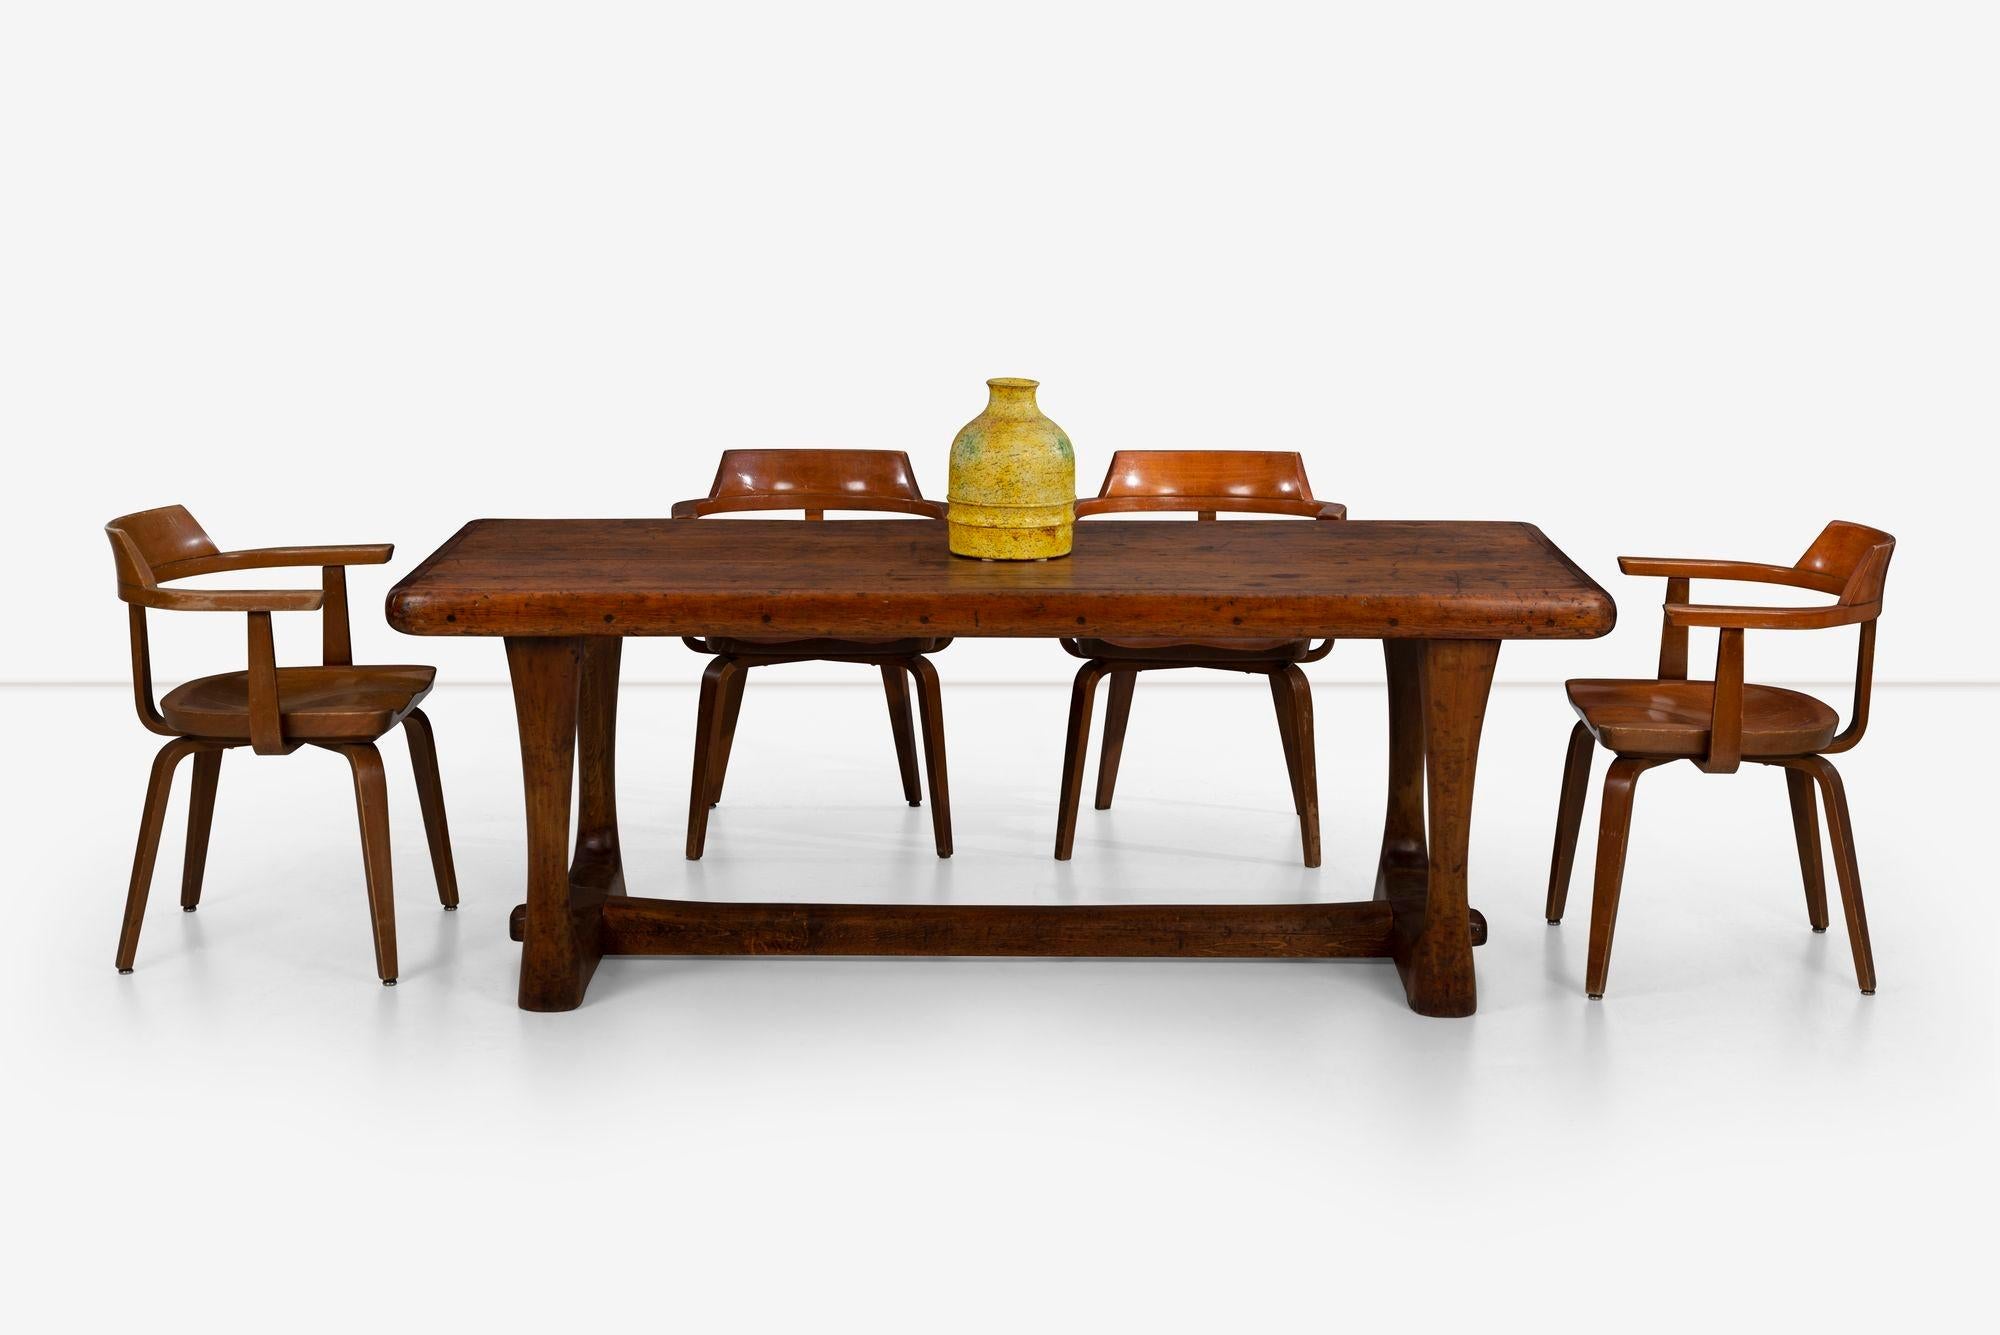 Important Esherick Table from The Hedgerow Collection. Crafted by Esherick in 1924. The table is thought to have been used by Esherick at the family's home Sunekrest prior to 1938. That year Esherick enhanced the table's form by reshaping its legs,